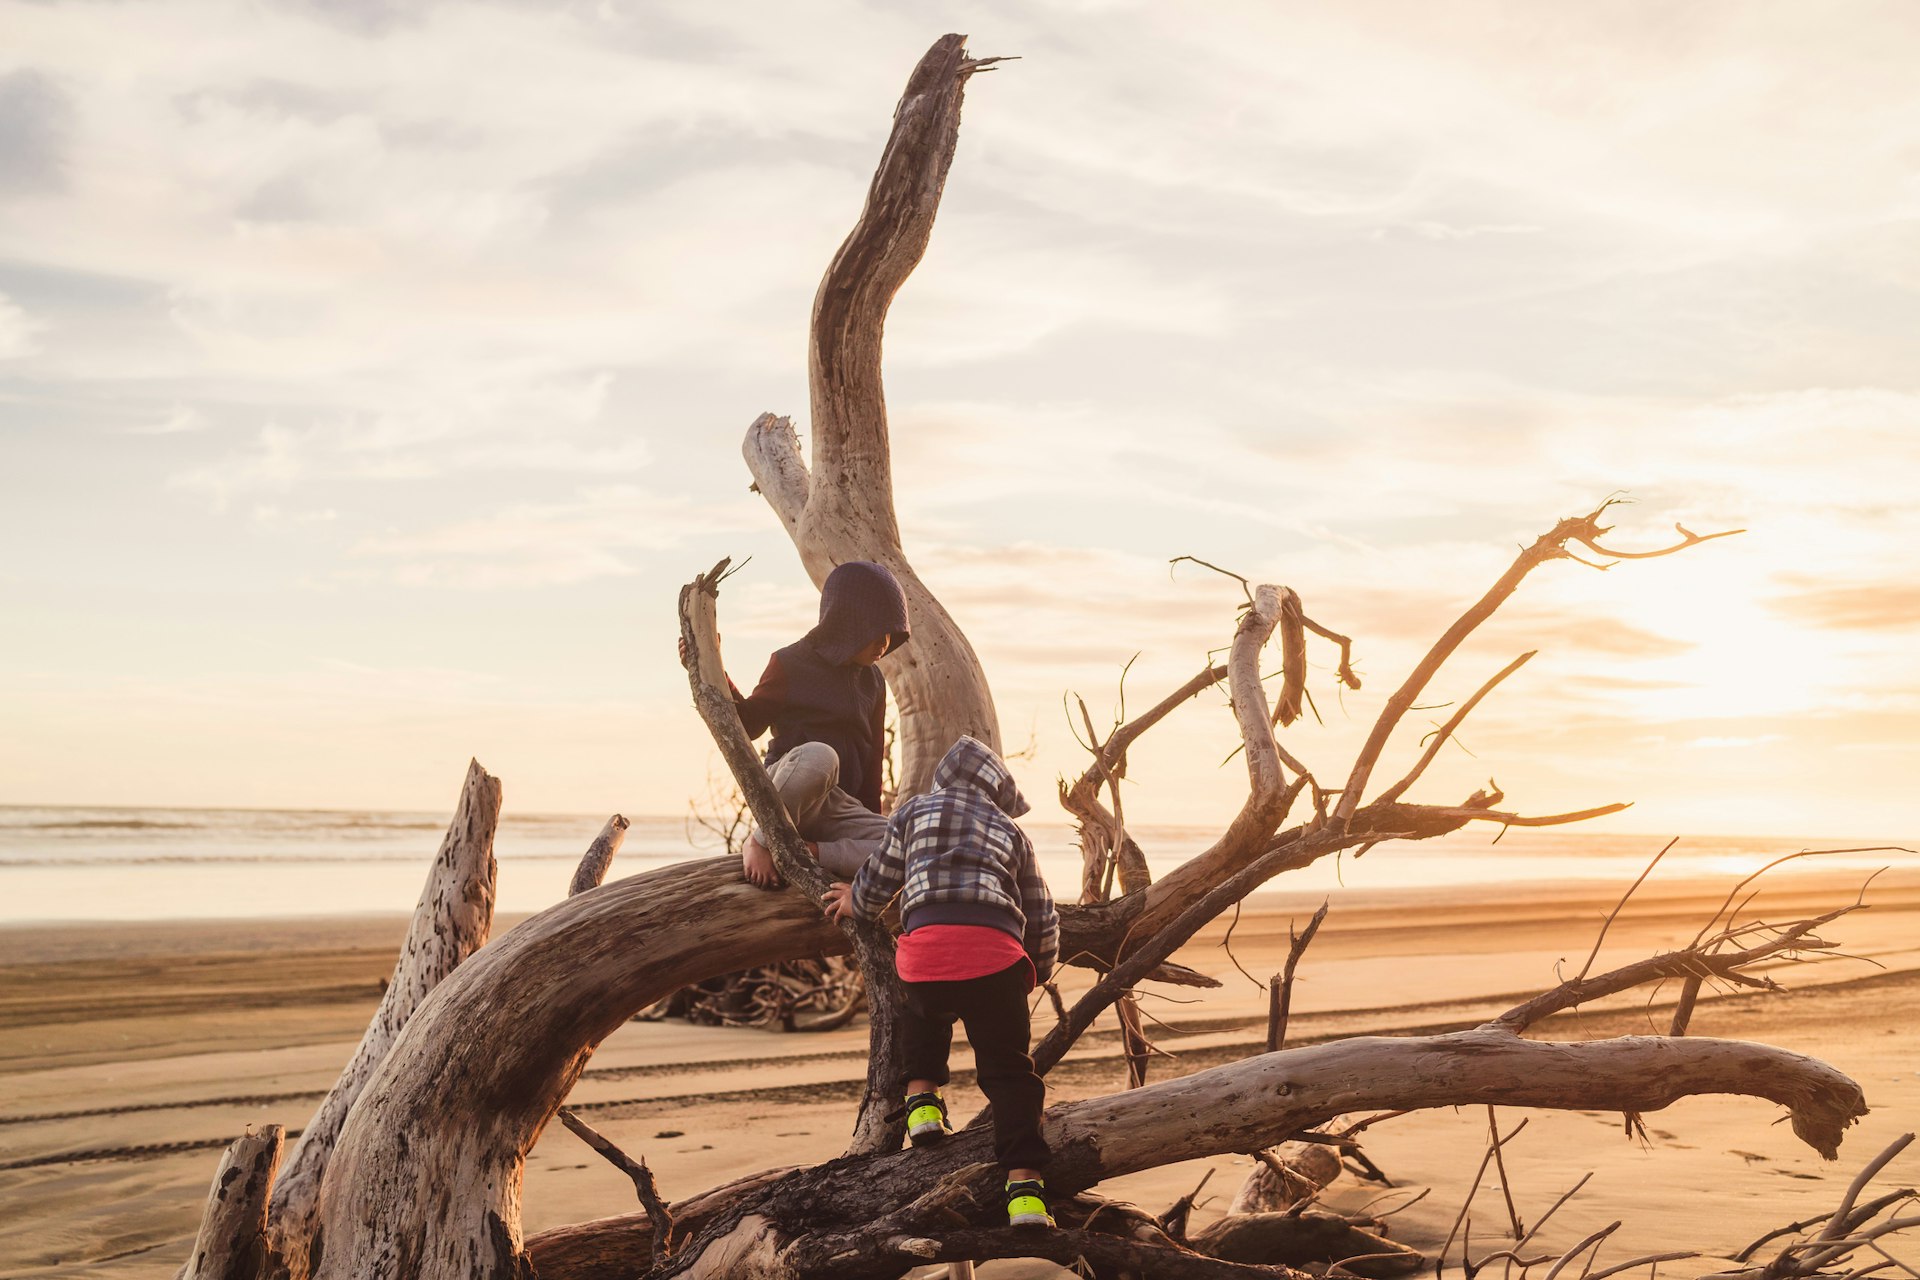 Two little boys climb on a washed-up tree at Muriwai beach, Auckland, New Zealand.